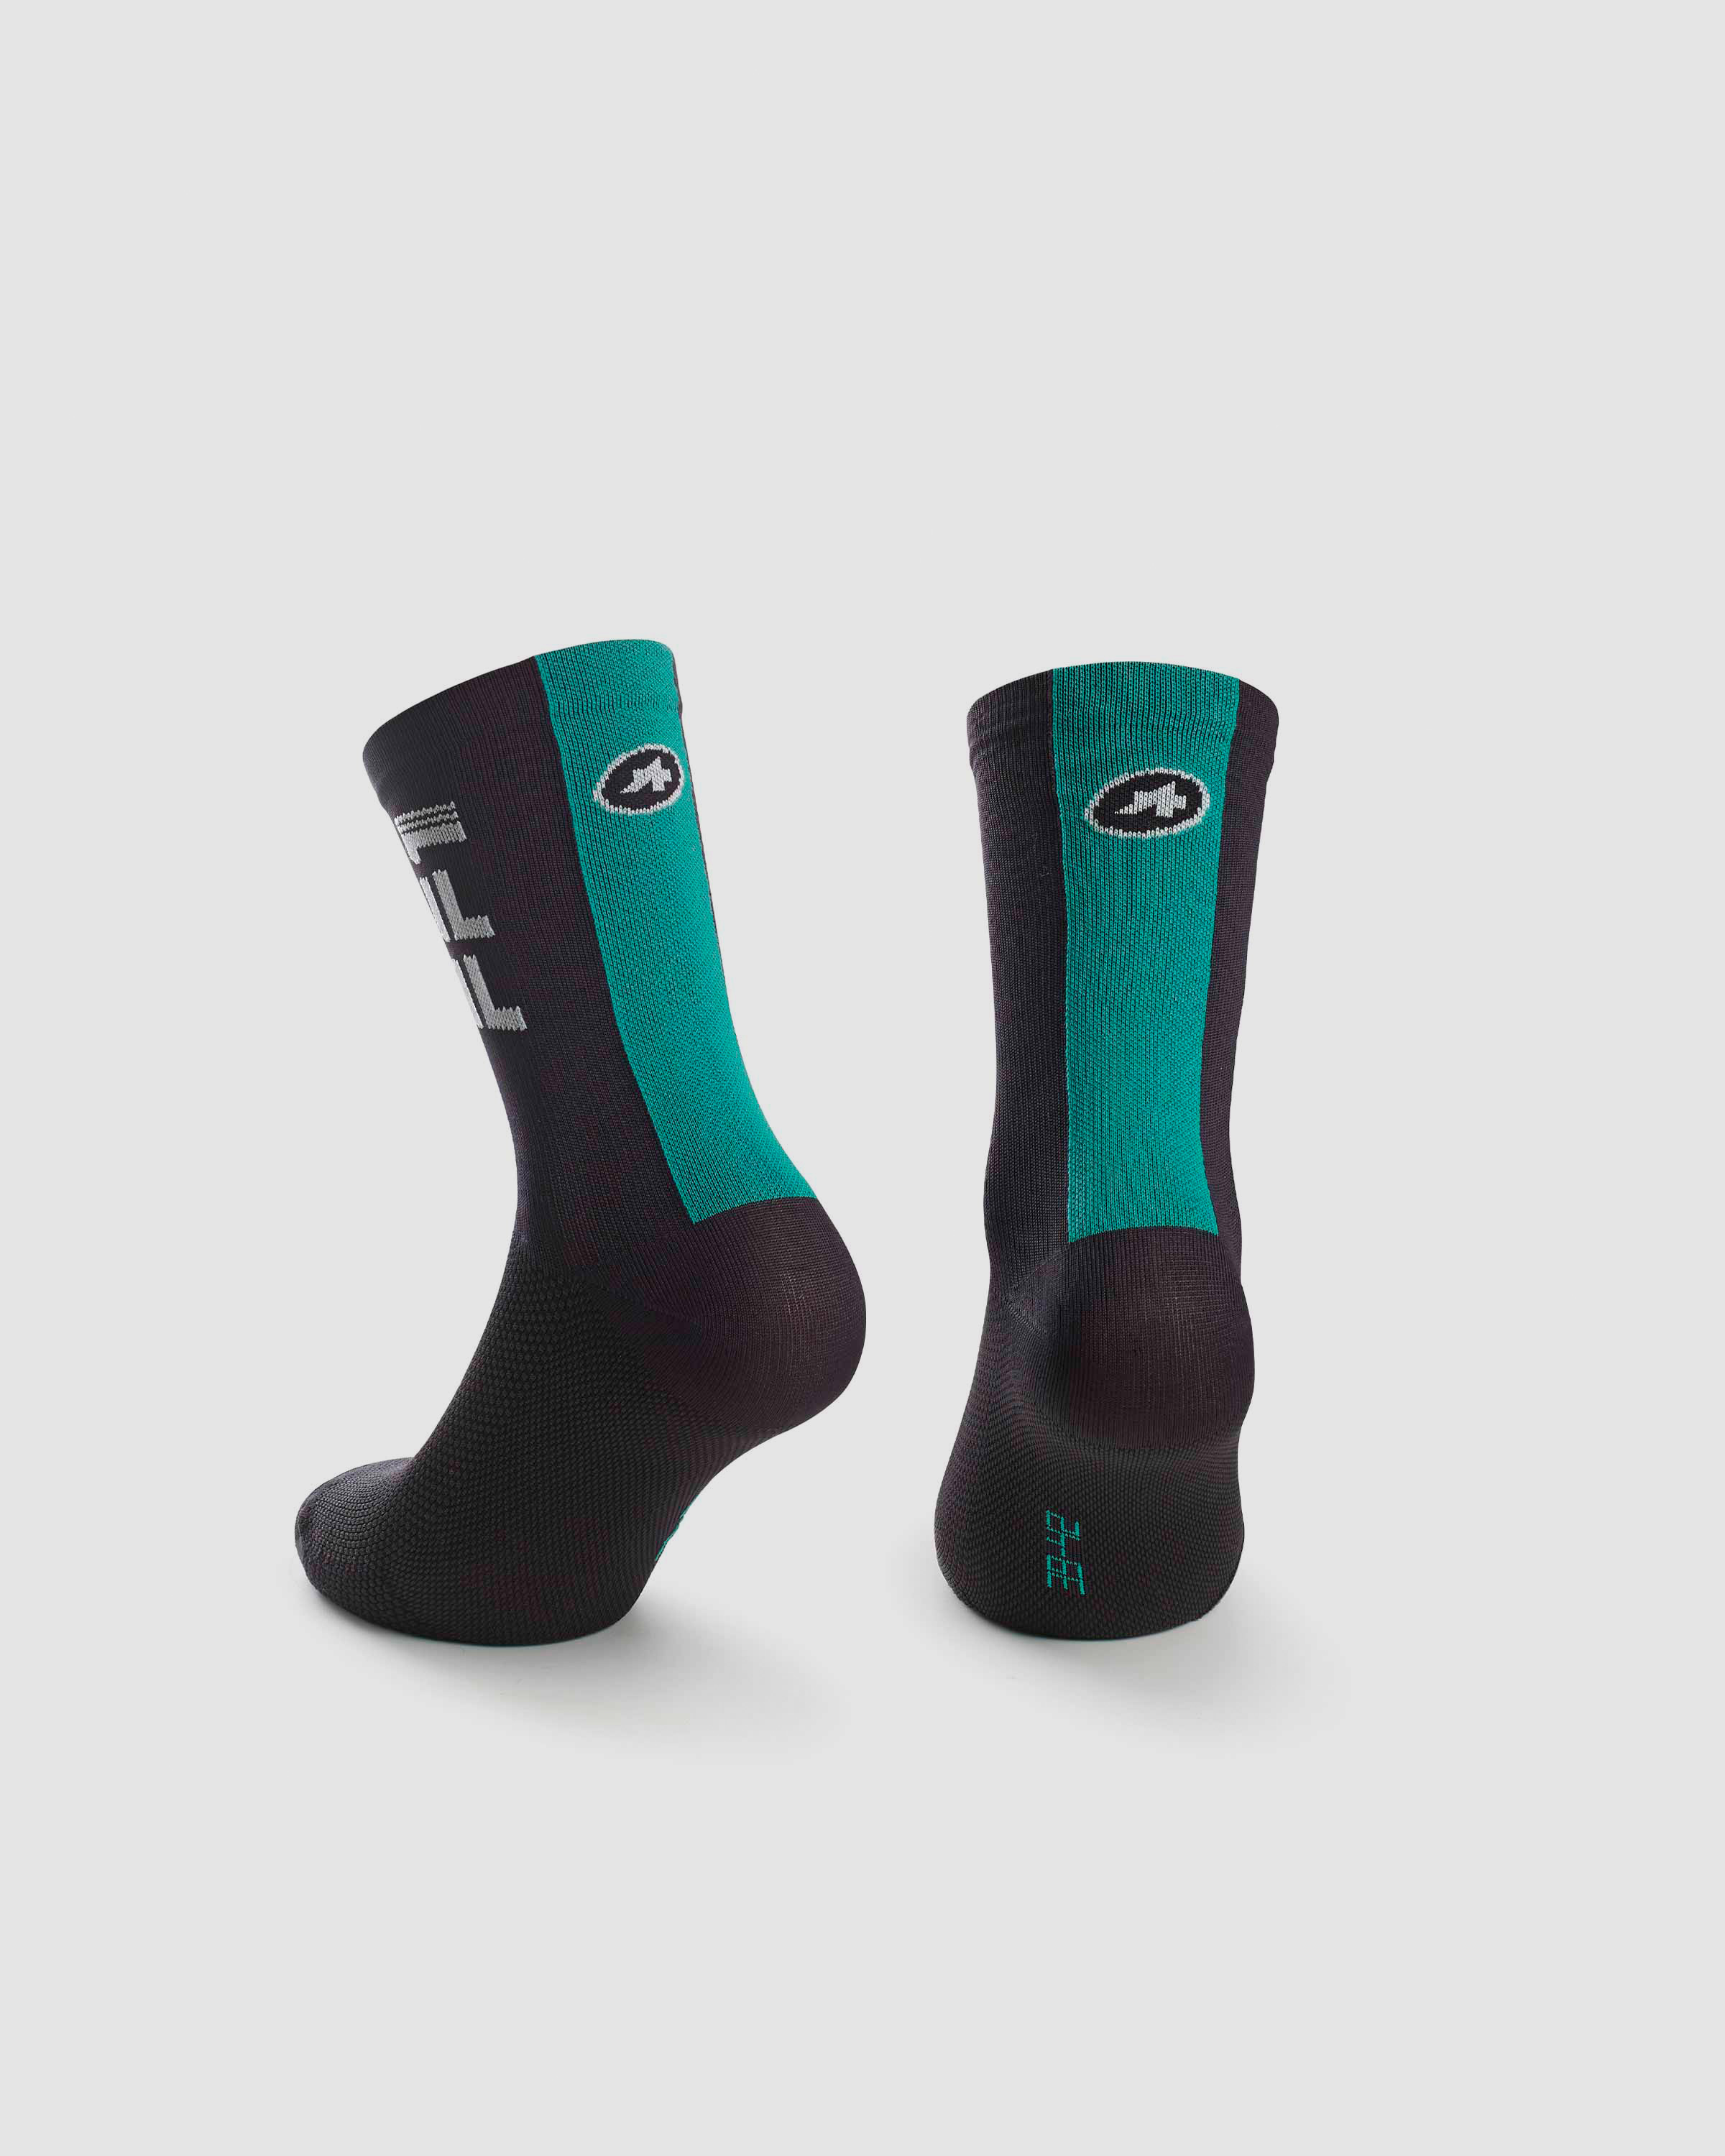 FF_1 Socks - ASSOS Of Switzerland - Official Outlet